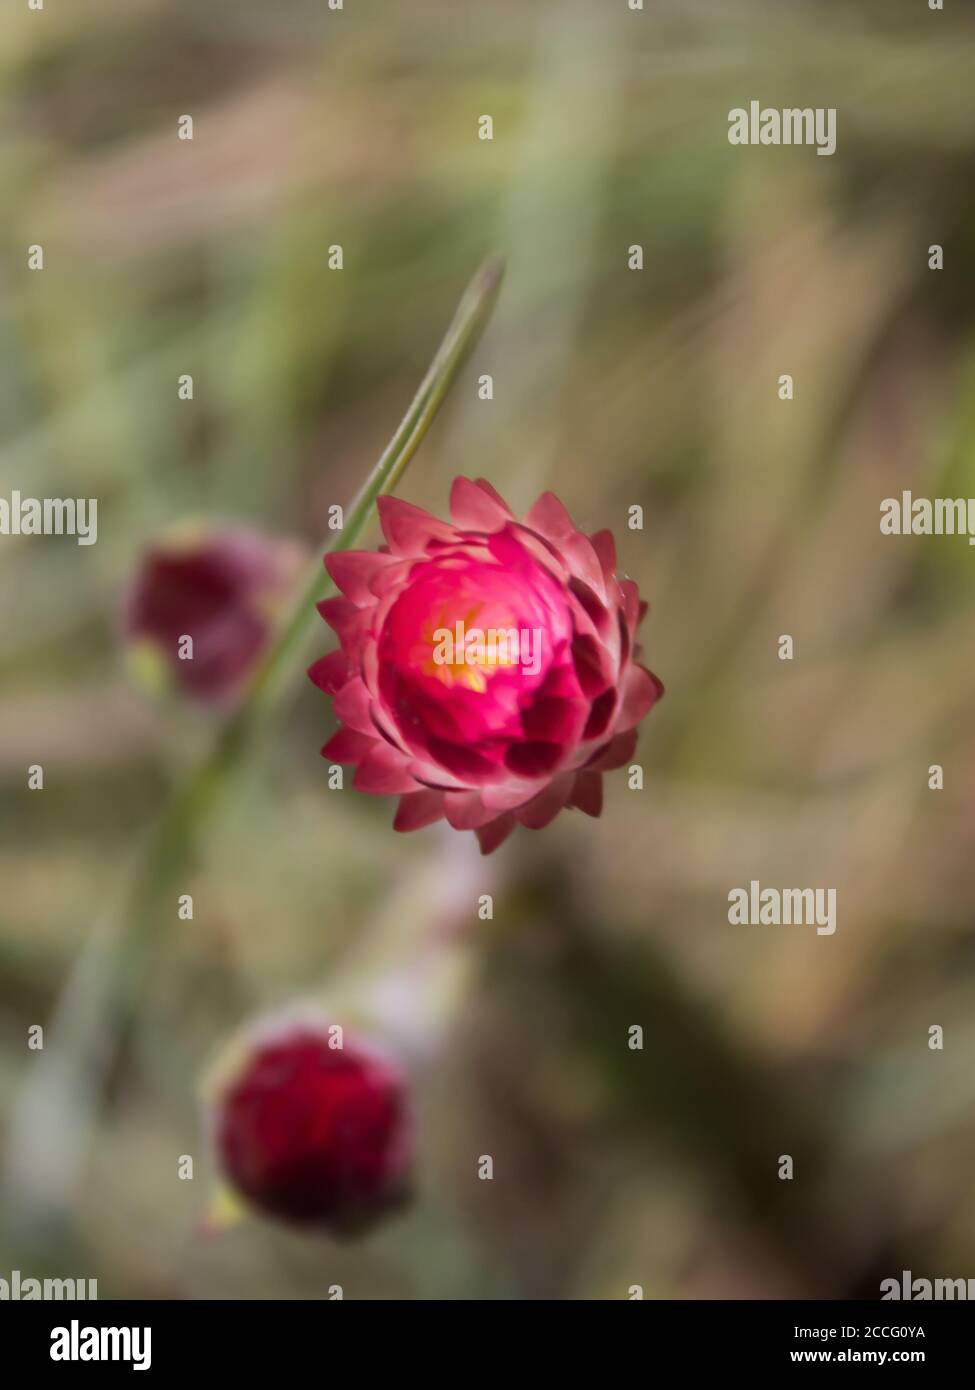 A Pink everlasting, helichrysum Adenocarpum, bud starting to open, with the background out of focus Stock Photo